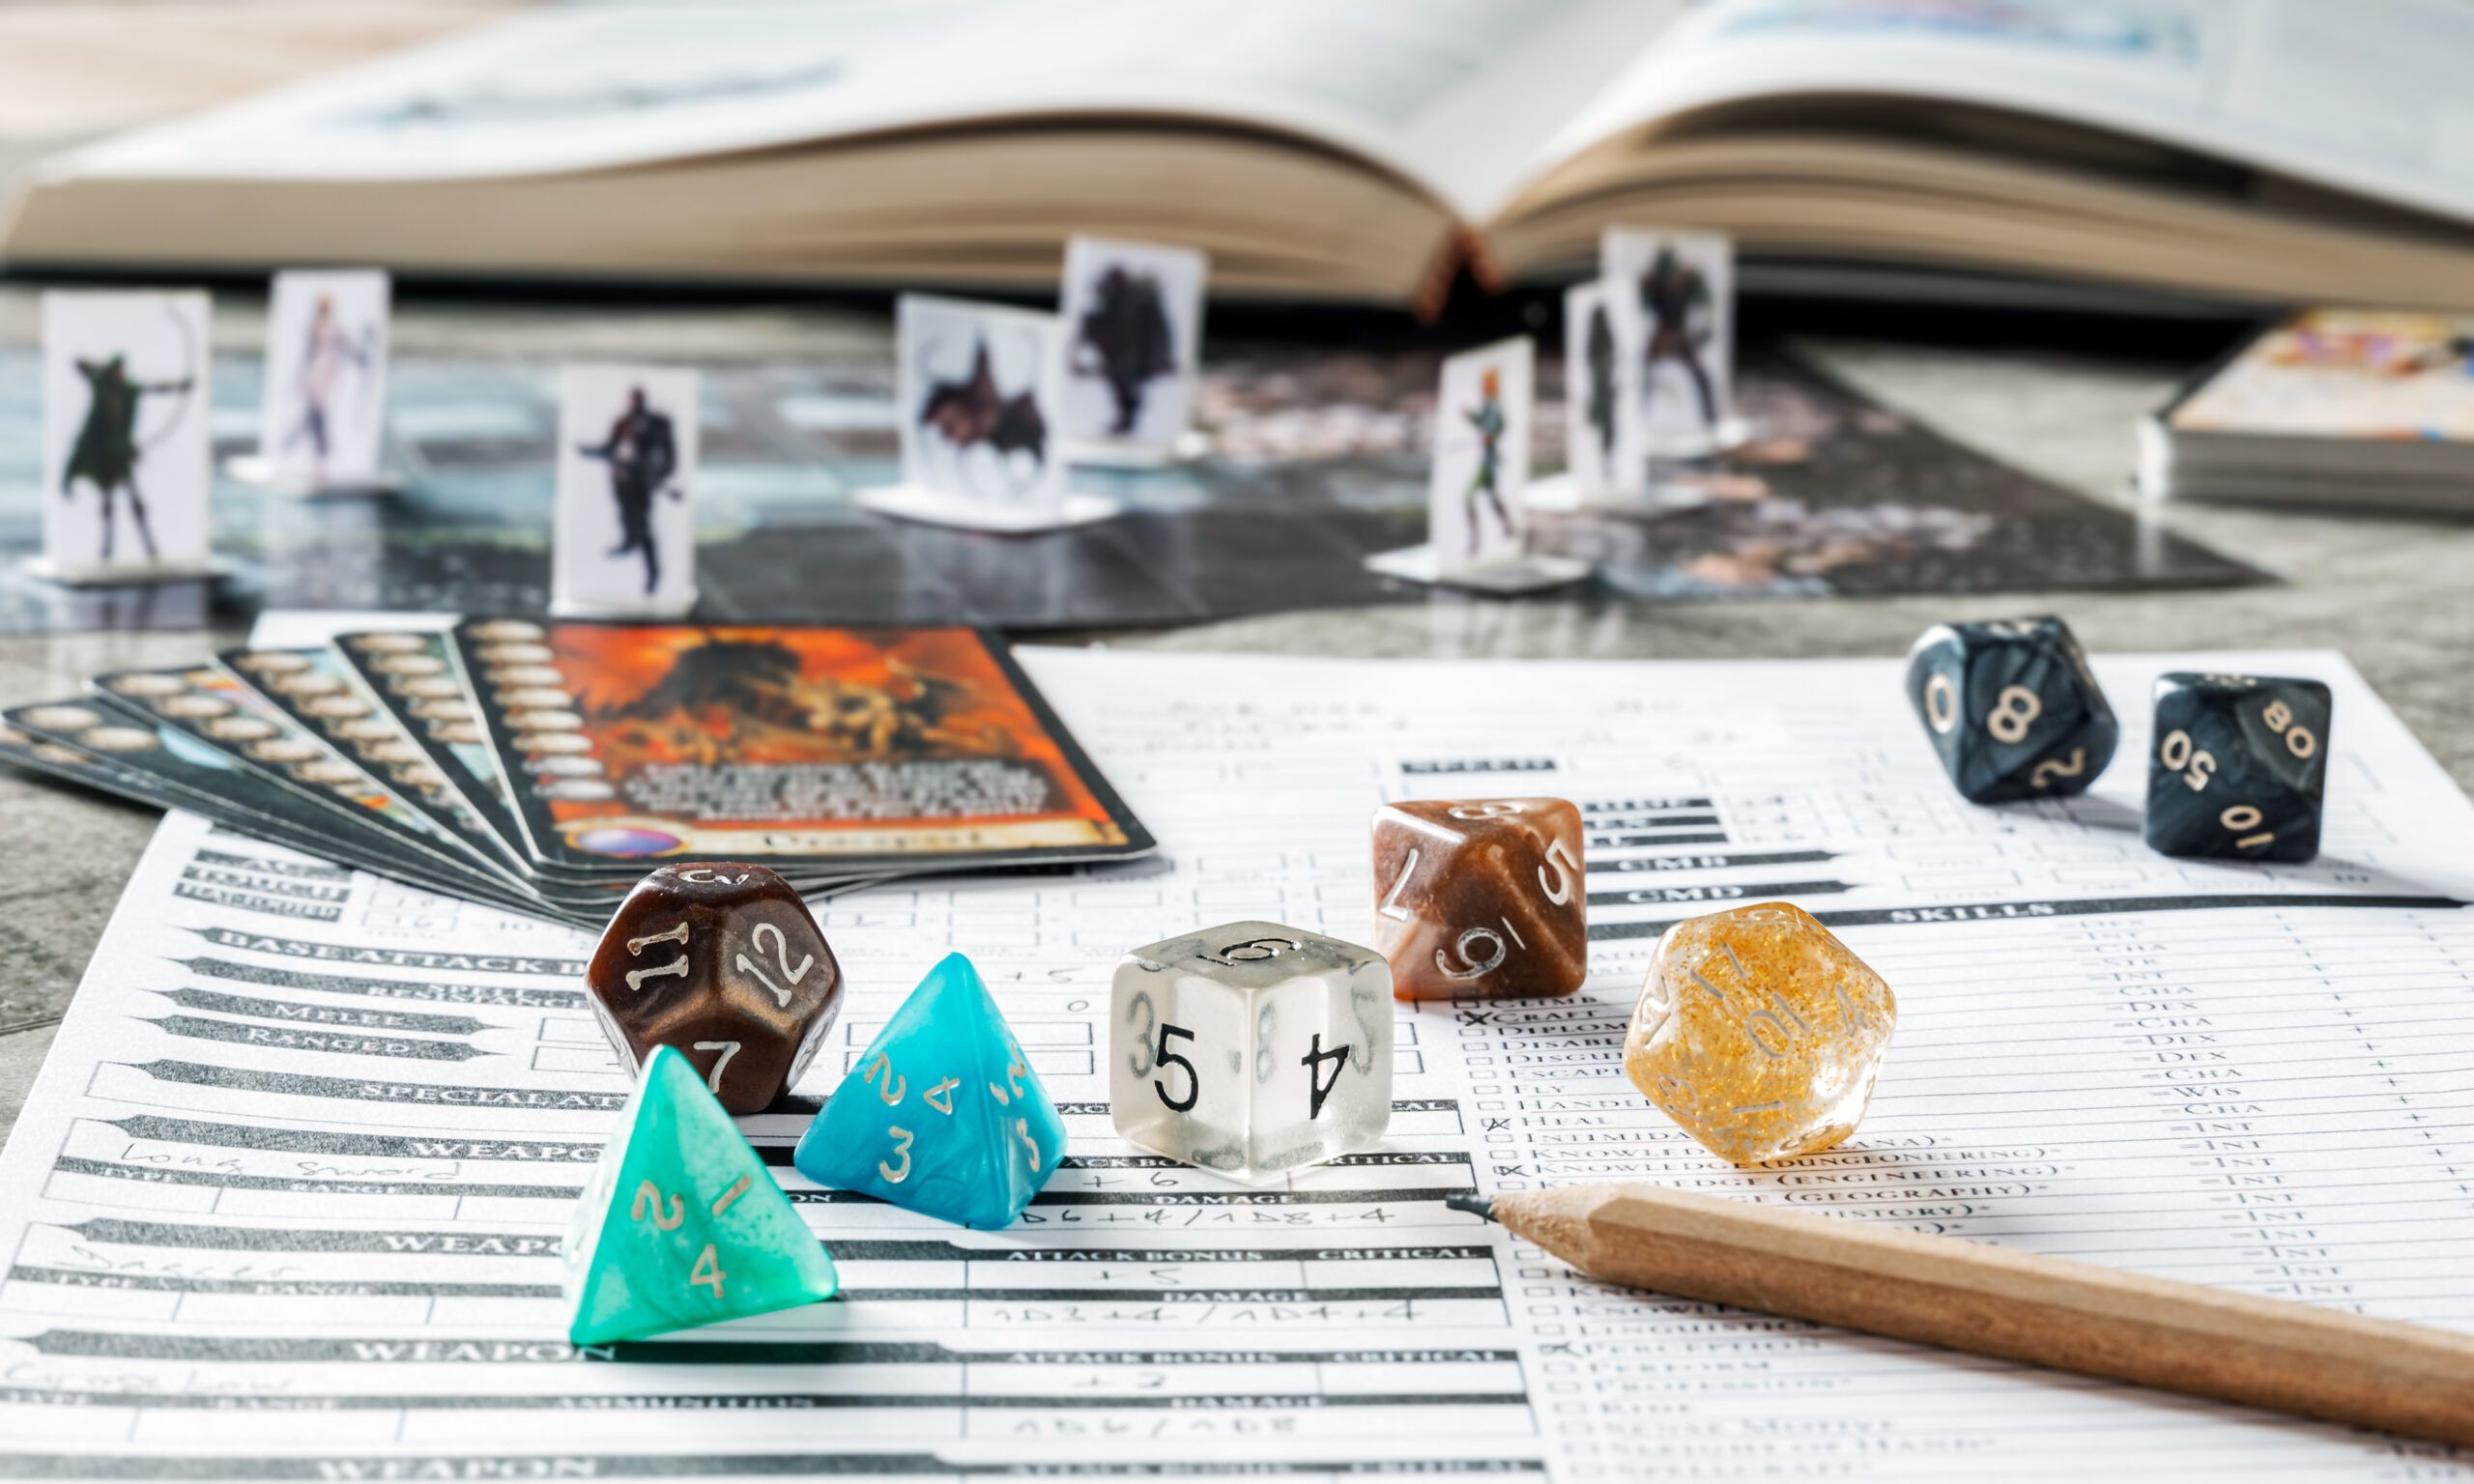 A role-playing game is set up on a table, with dice, cards, and characters.